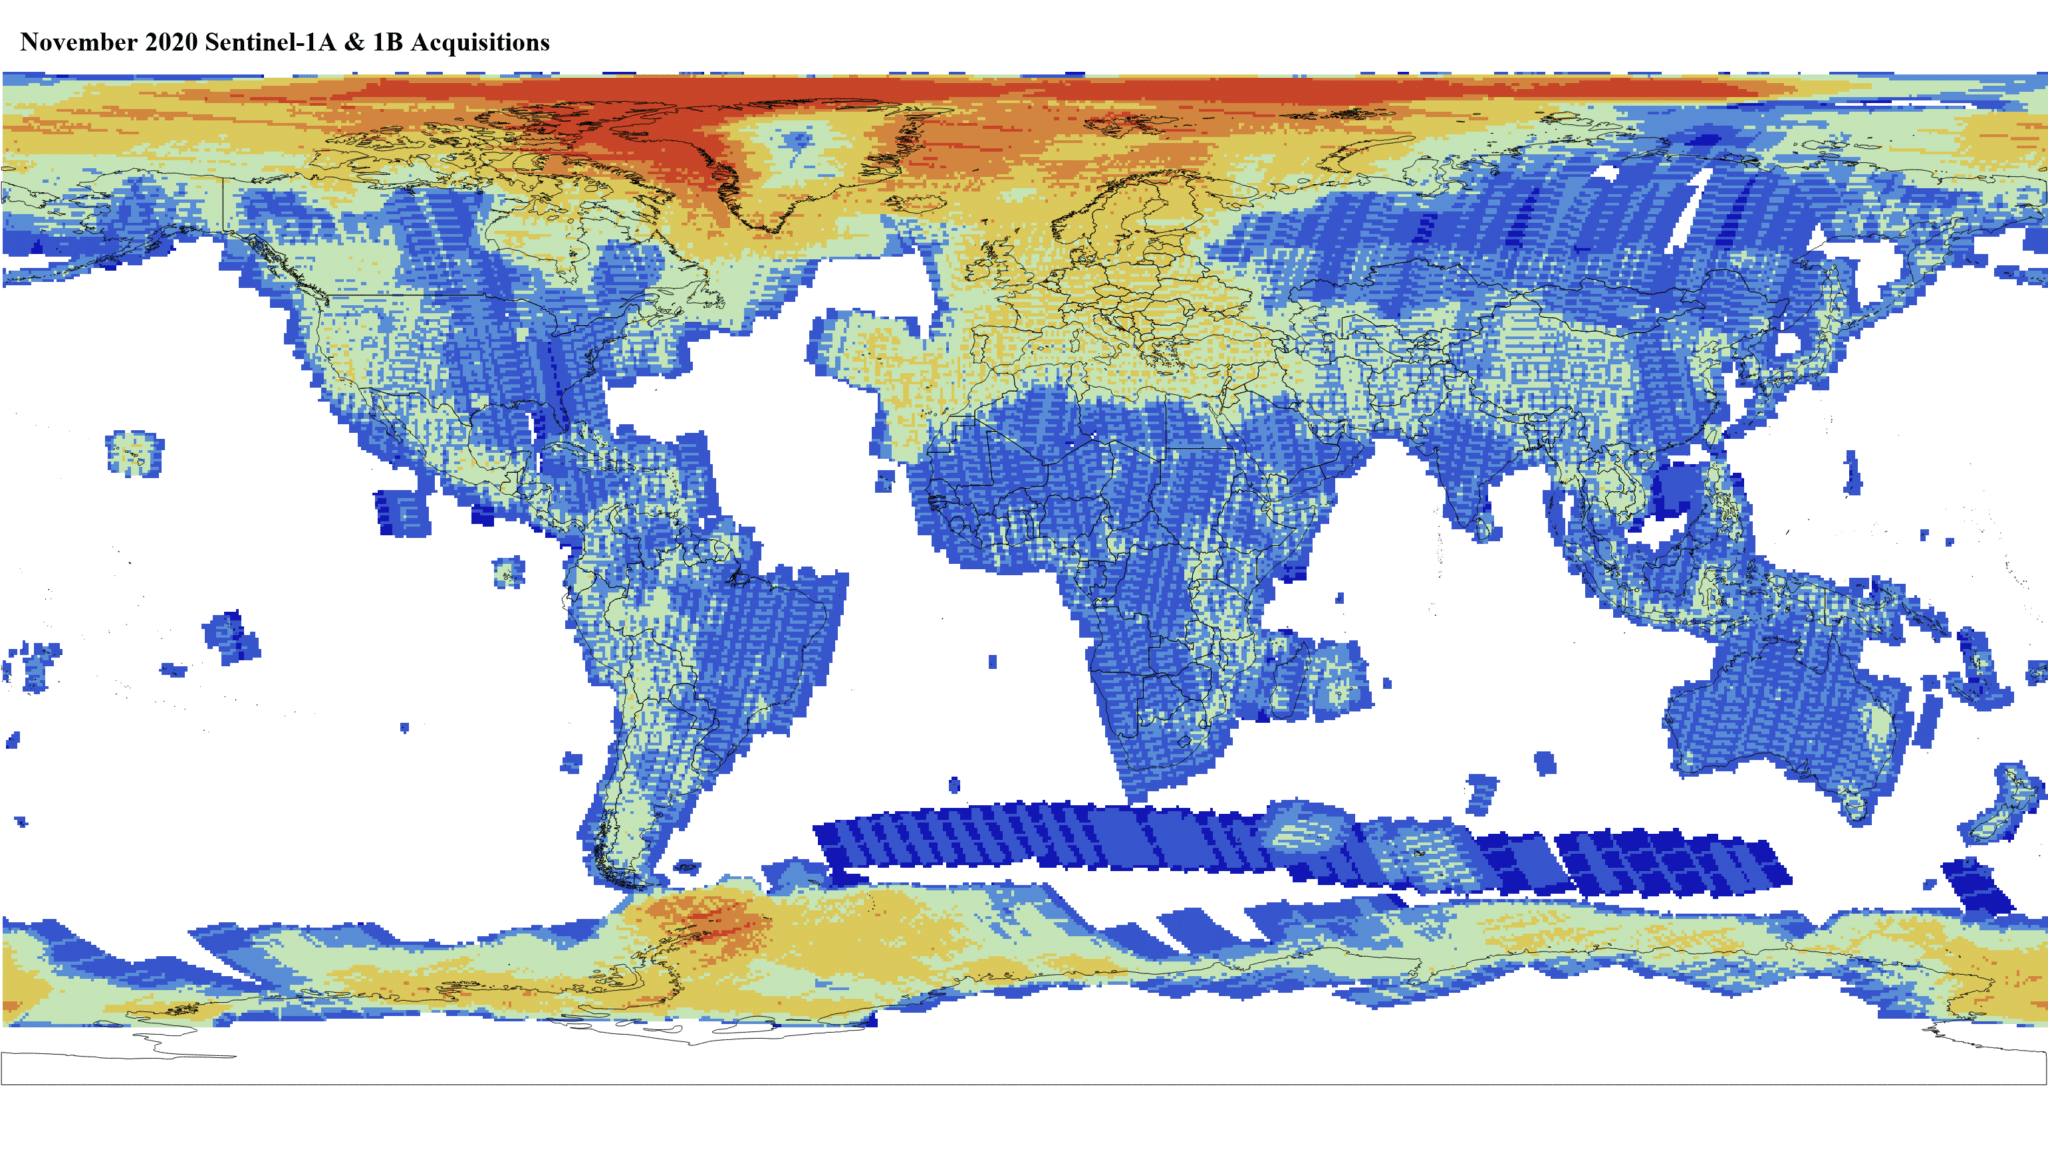 Heat map of Sentinel-1A and -1B GRD global acquisitions November 2020